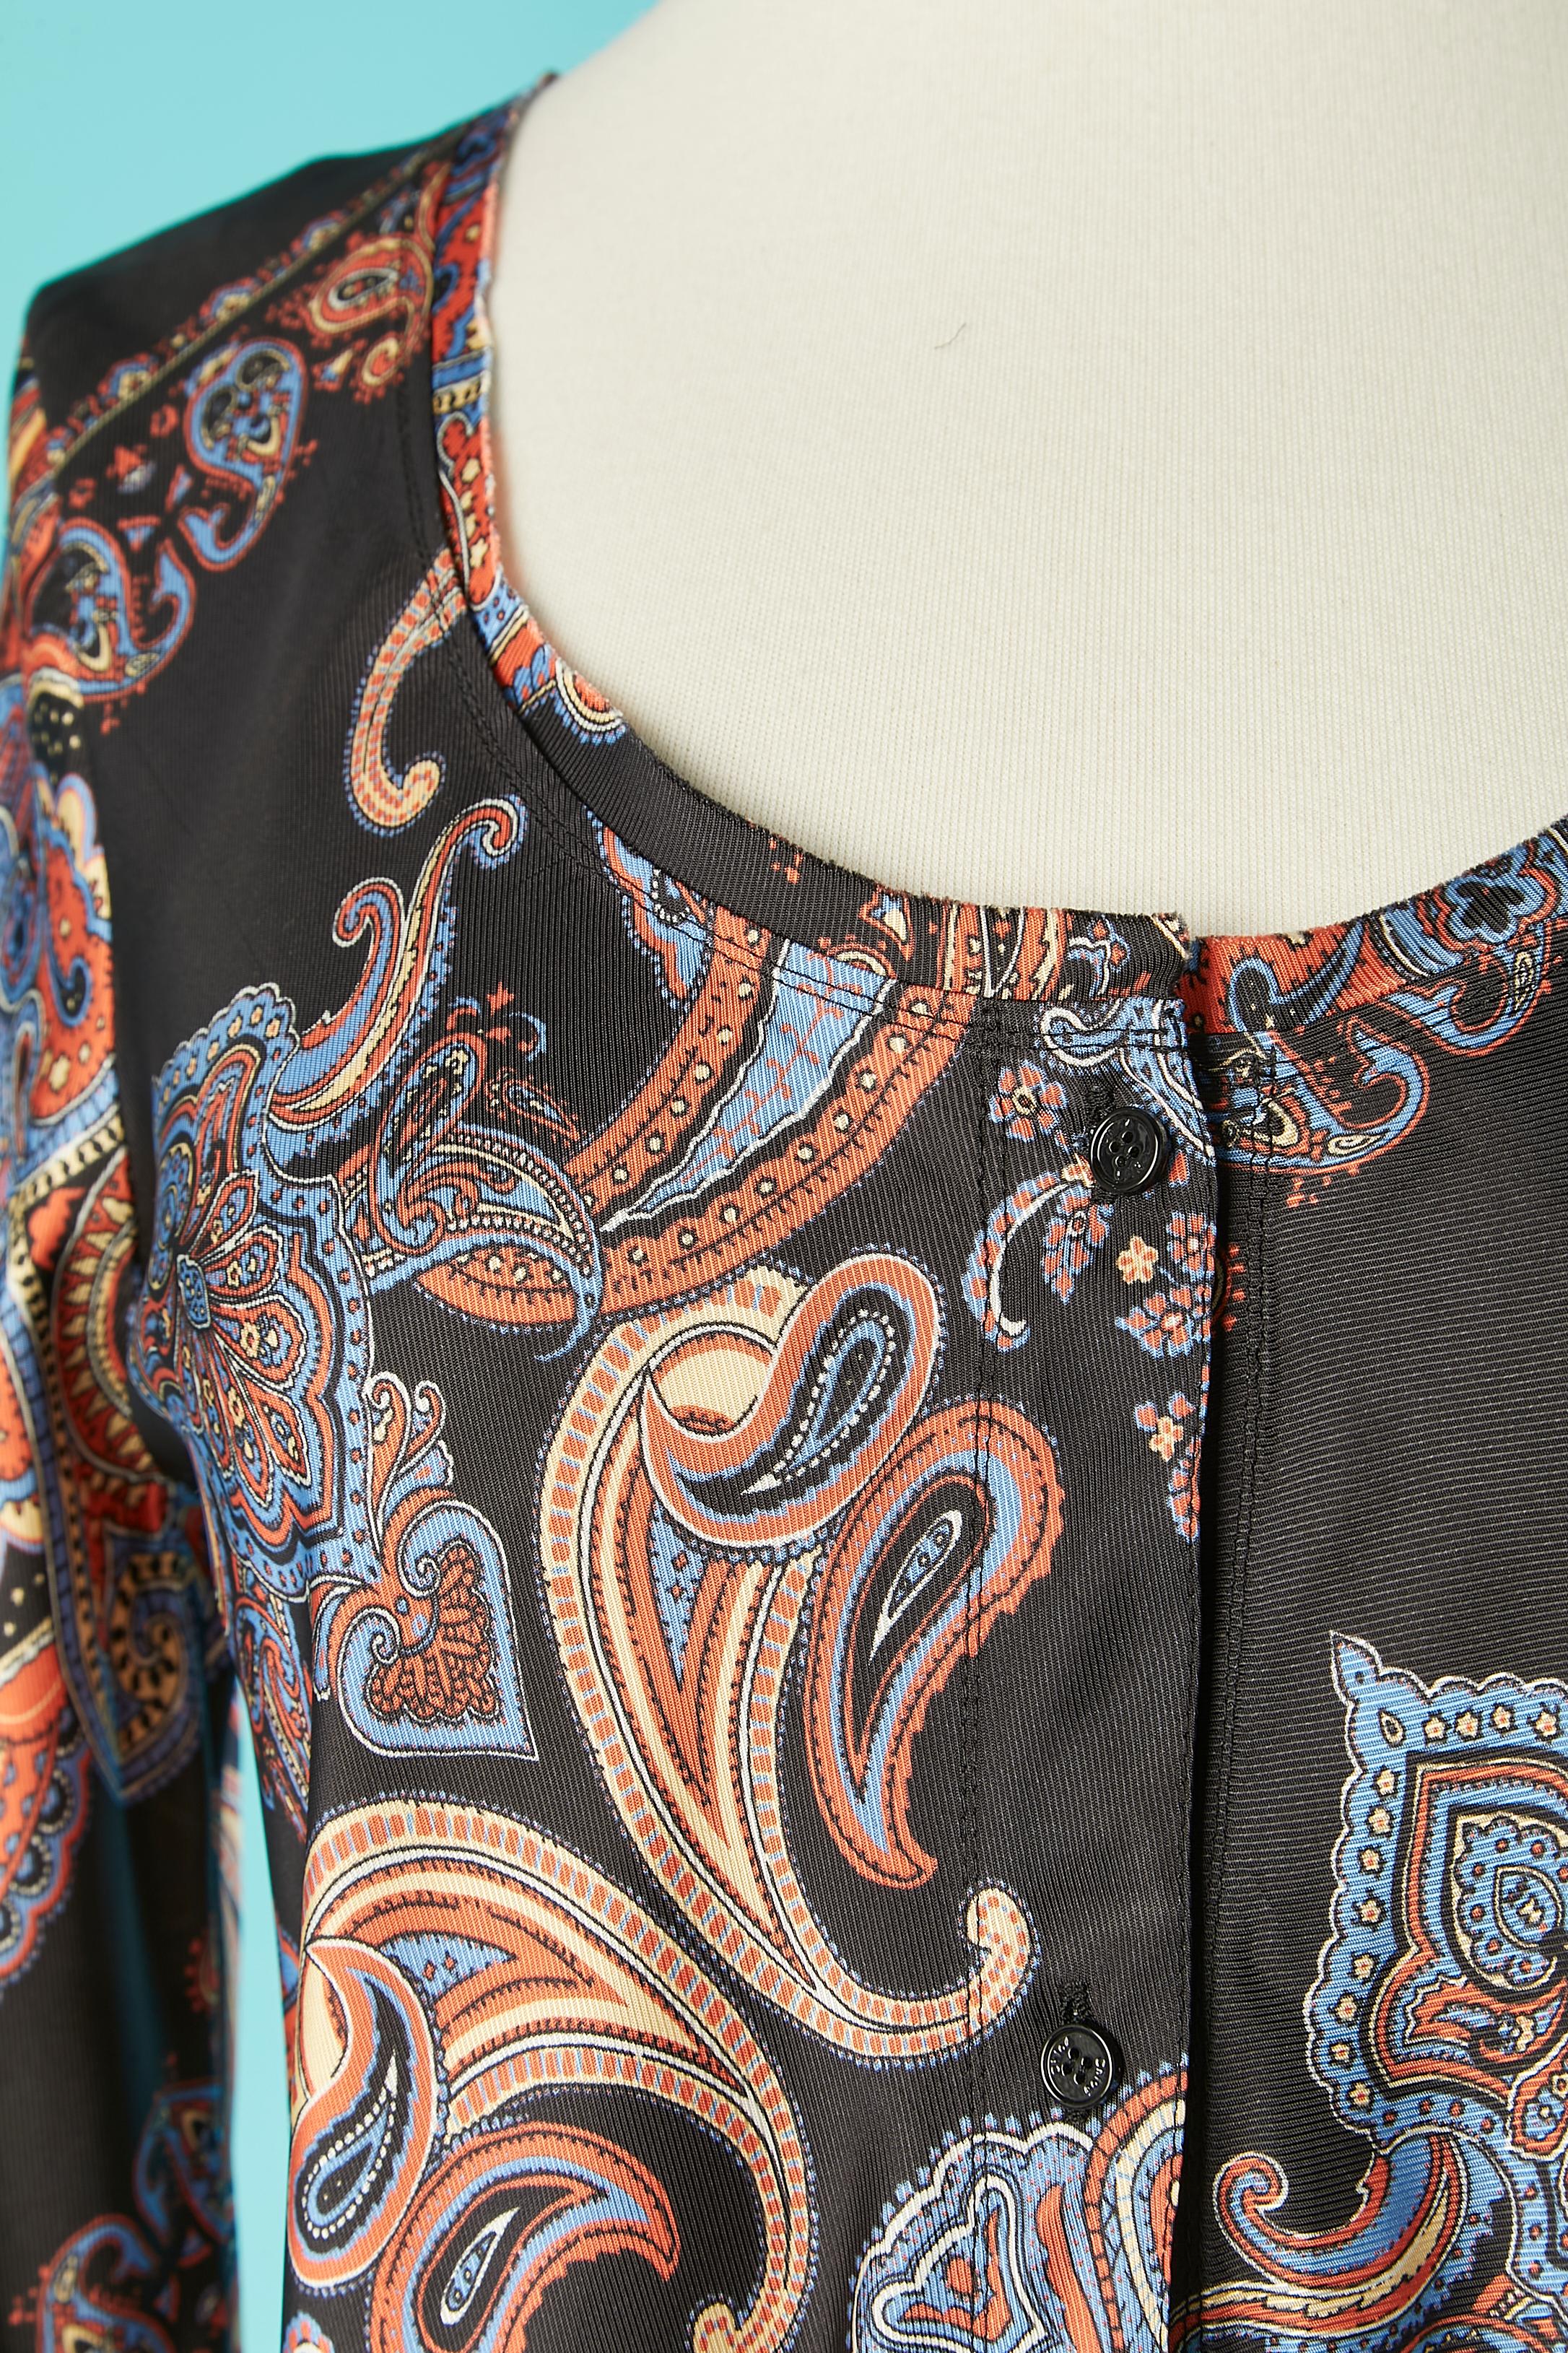 Paisley printed chemise dress.
Fabric composition : 100% rayon
 Button and buttonhole in the middle front. 
Shirt sleeve style with cuffs, buttons and buttonhole and split on the top of the arms. 
SIZE 36 (Fr) 6 (US) S 